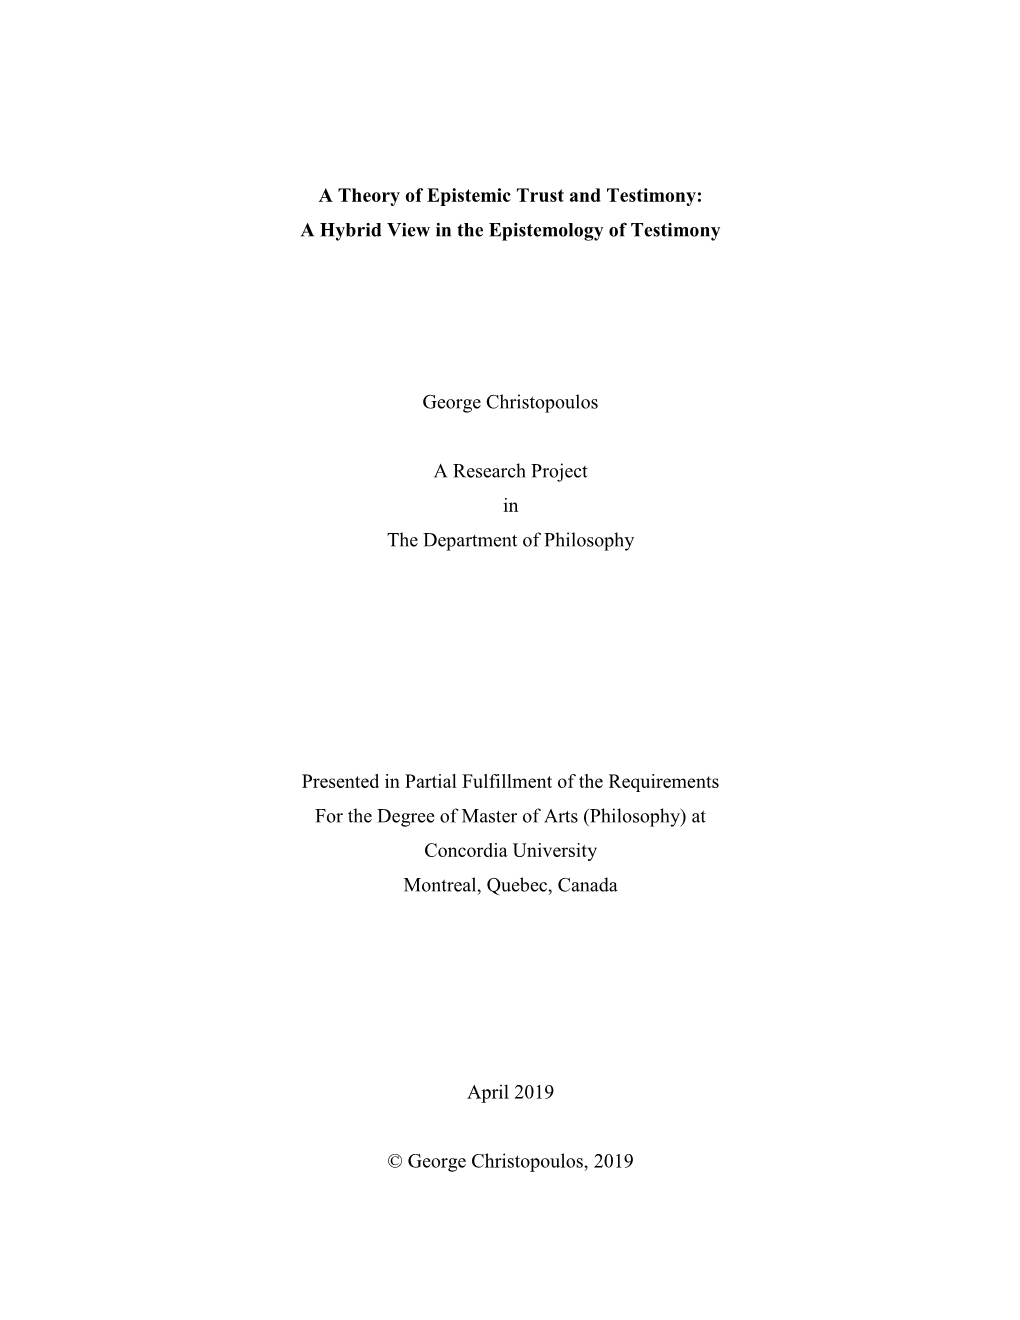 A Theory of Epistemic Trust and Testimony: a Hybrid View in the Epistemology of Testimony